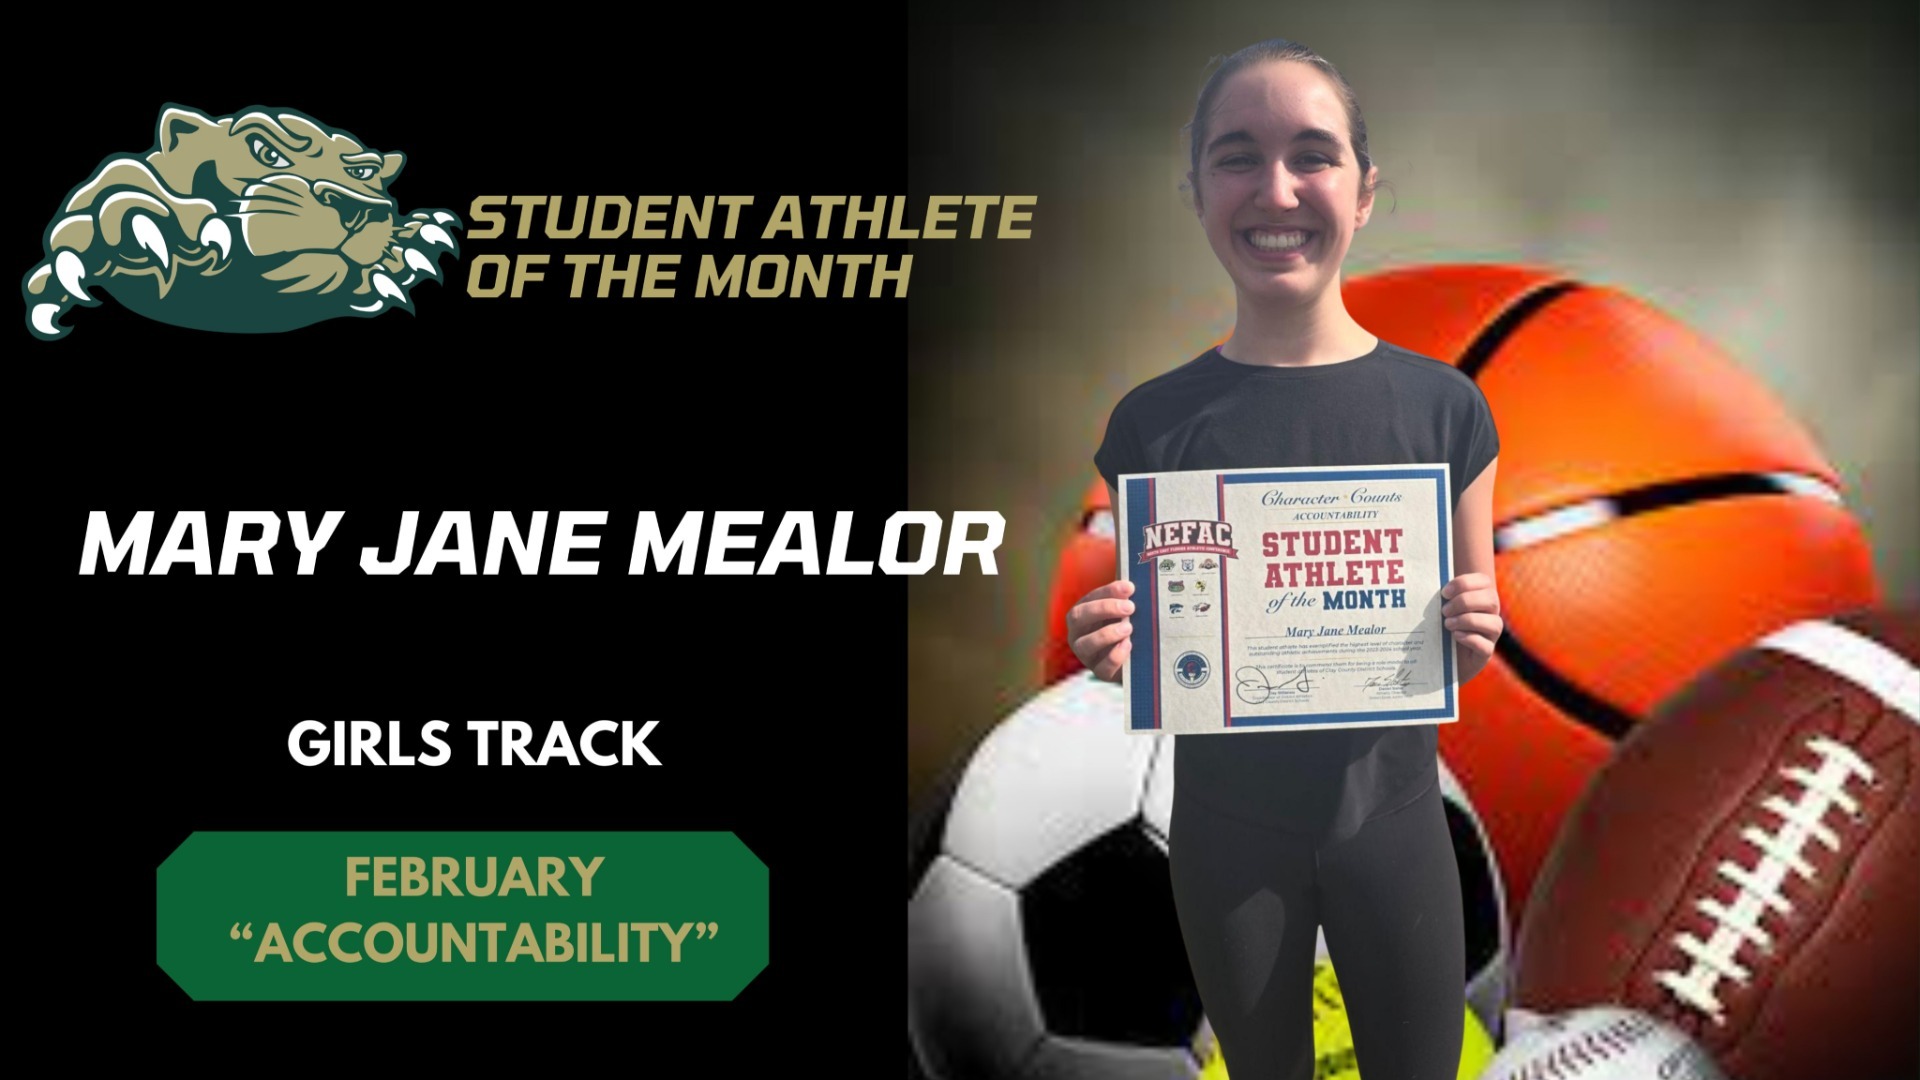 Slide 0 - STUDENT ATHLETE OF THE MONTH FOR FEBRUARY